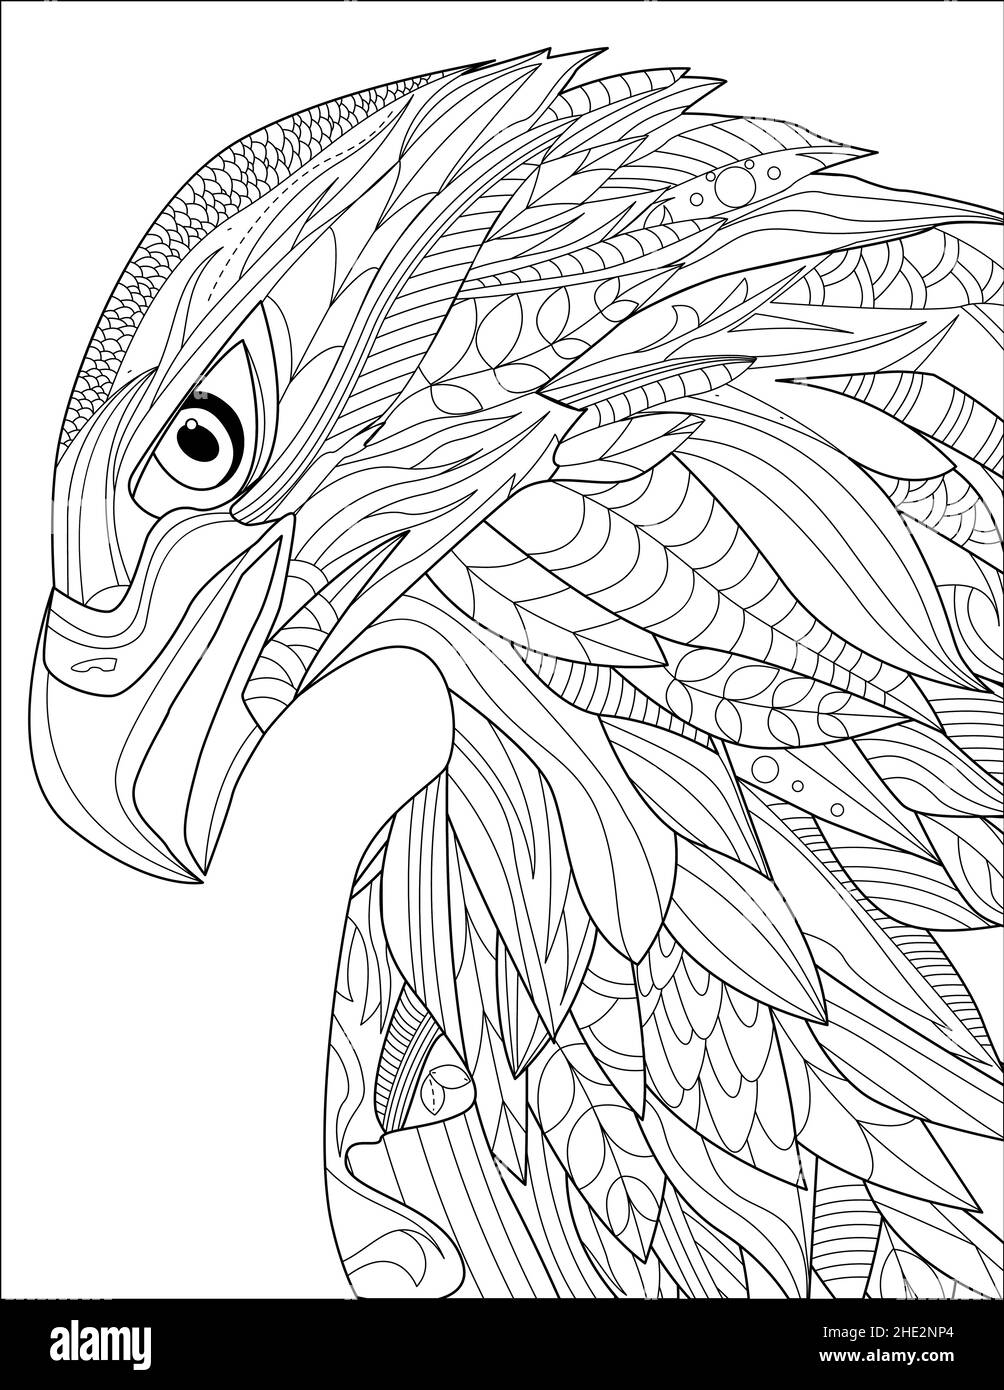 Eagle Head Line Drawing With Geometric Detailed Coloring Book idea Stock Vector